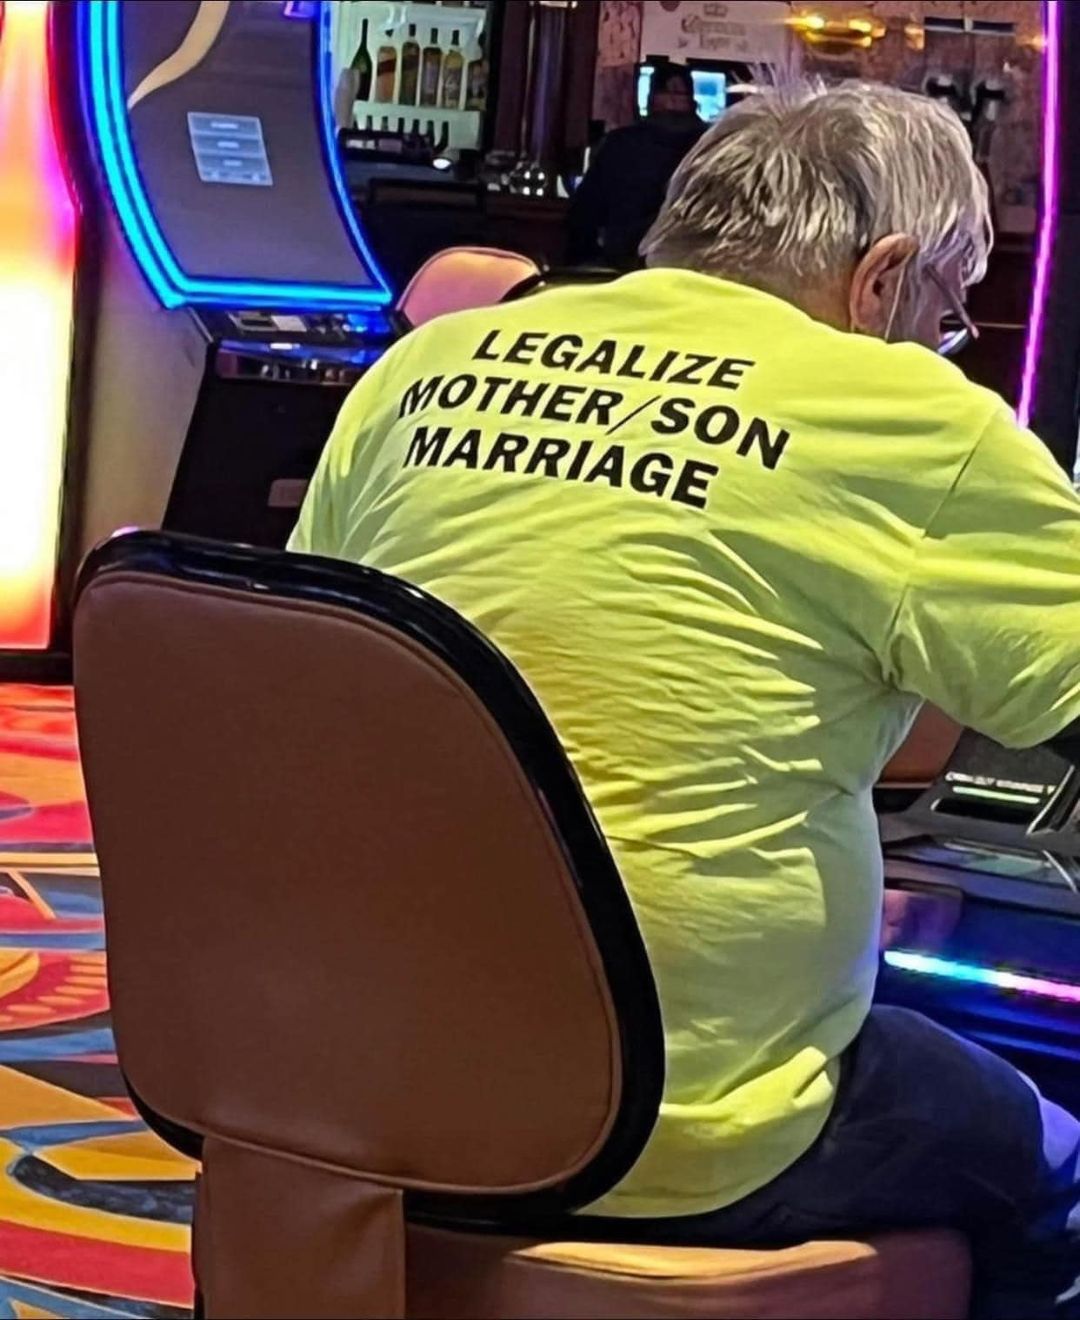 trashy pics - legalize mother son marriage - Legalize MotherSon Marriage